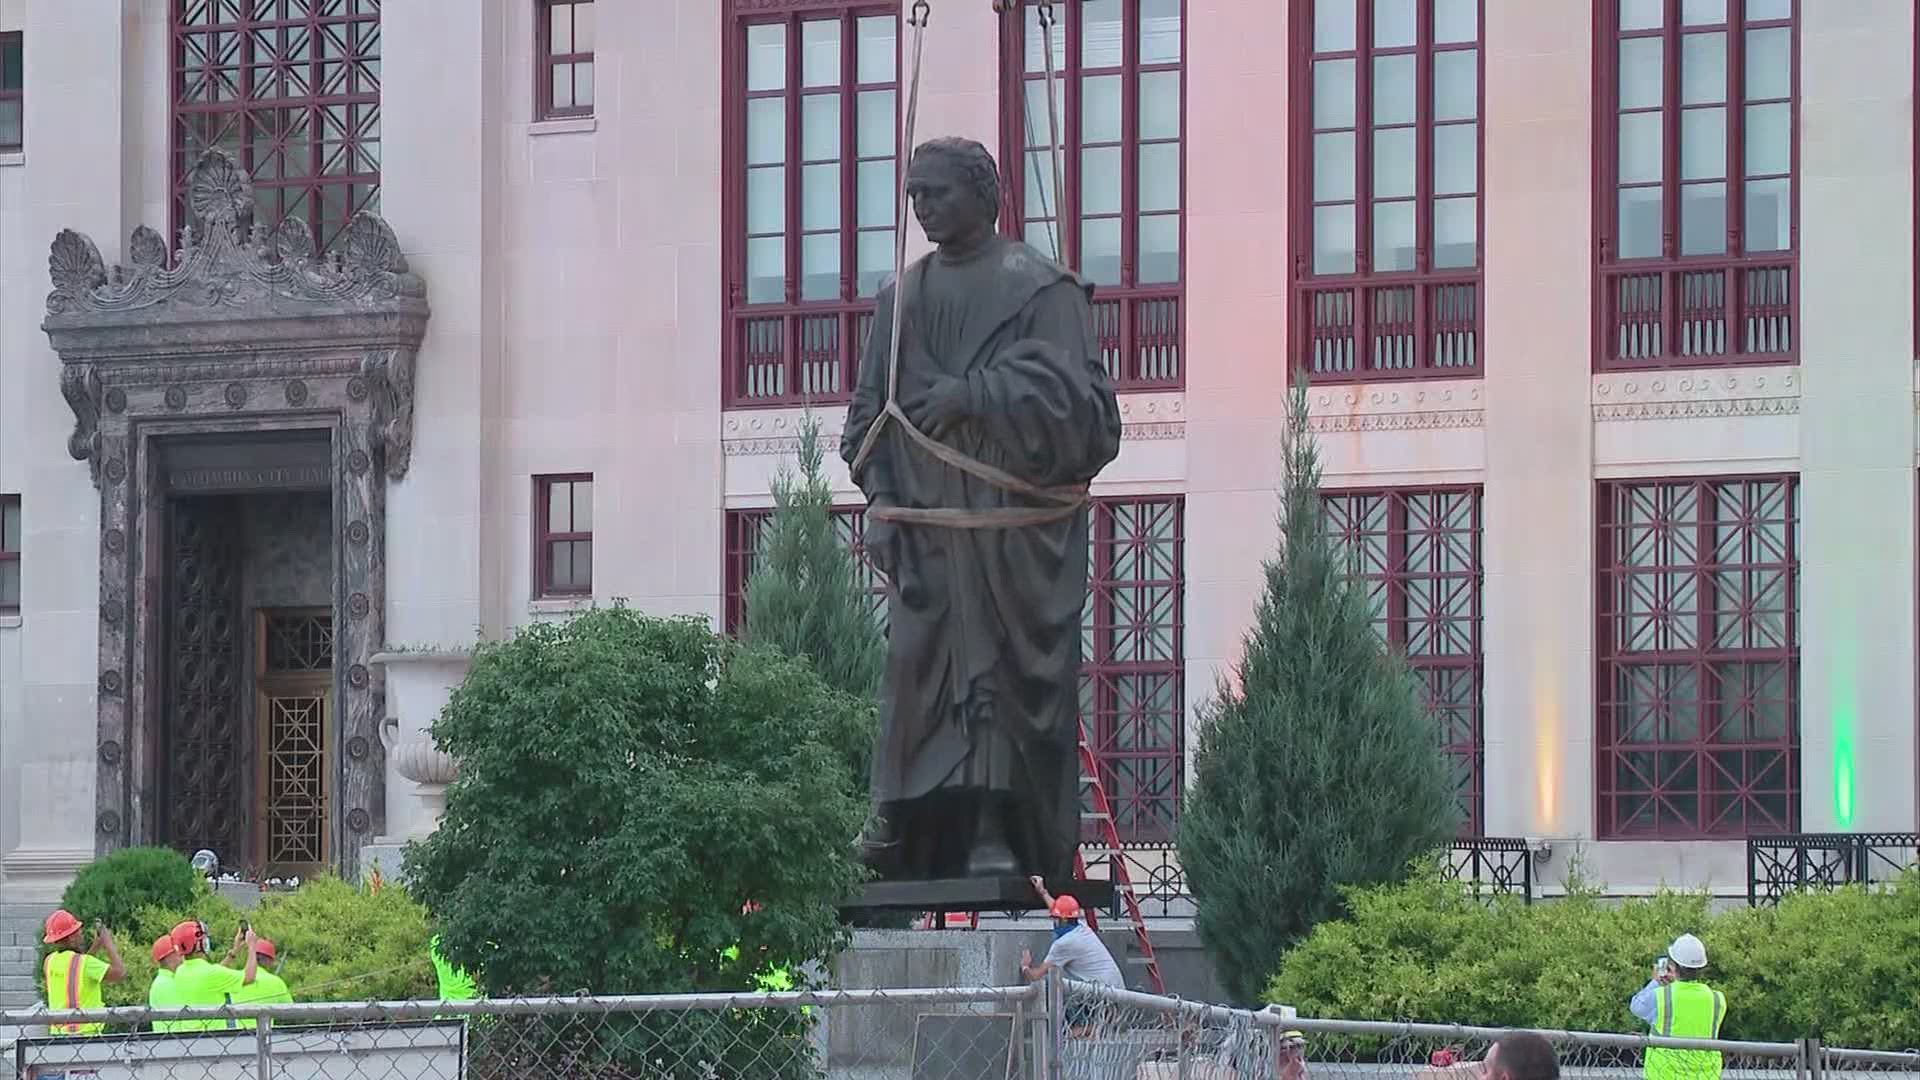 Mixed emotions from onlookers as Christopher Columbus statue is taken down at City Hall.